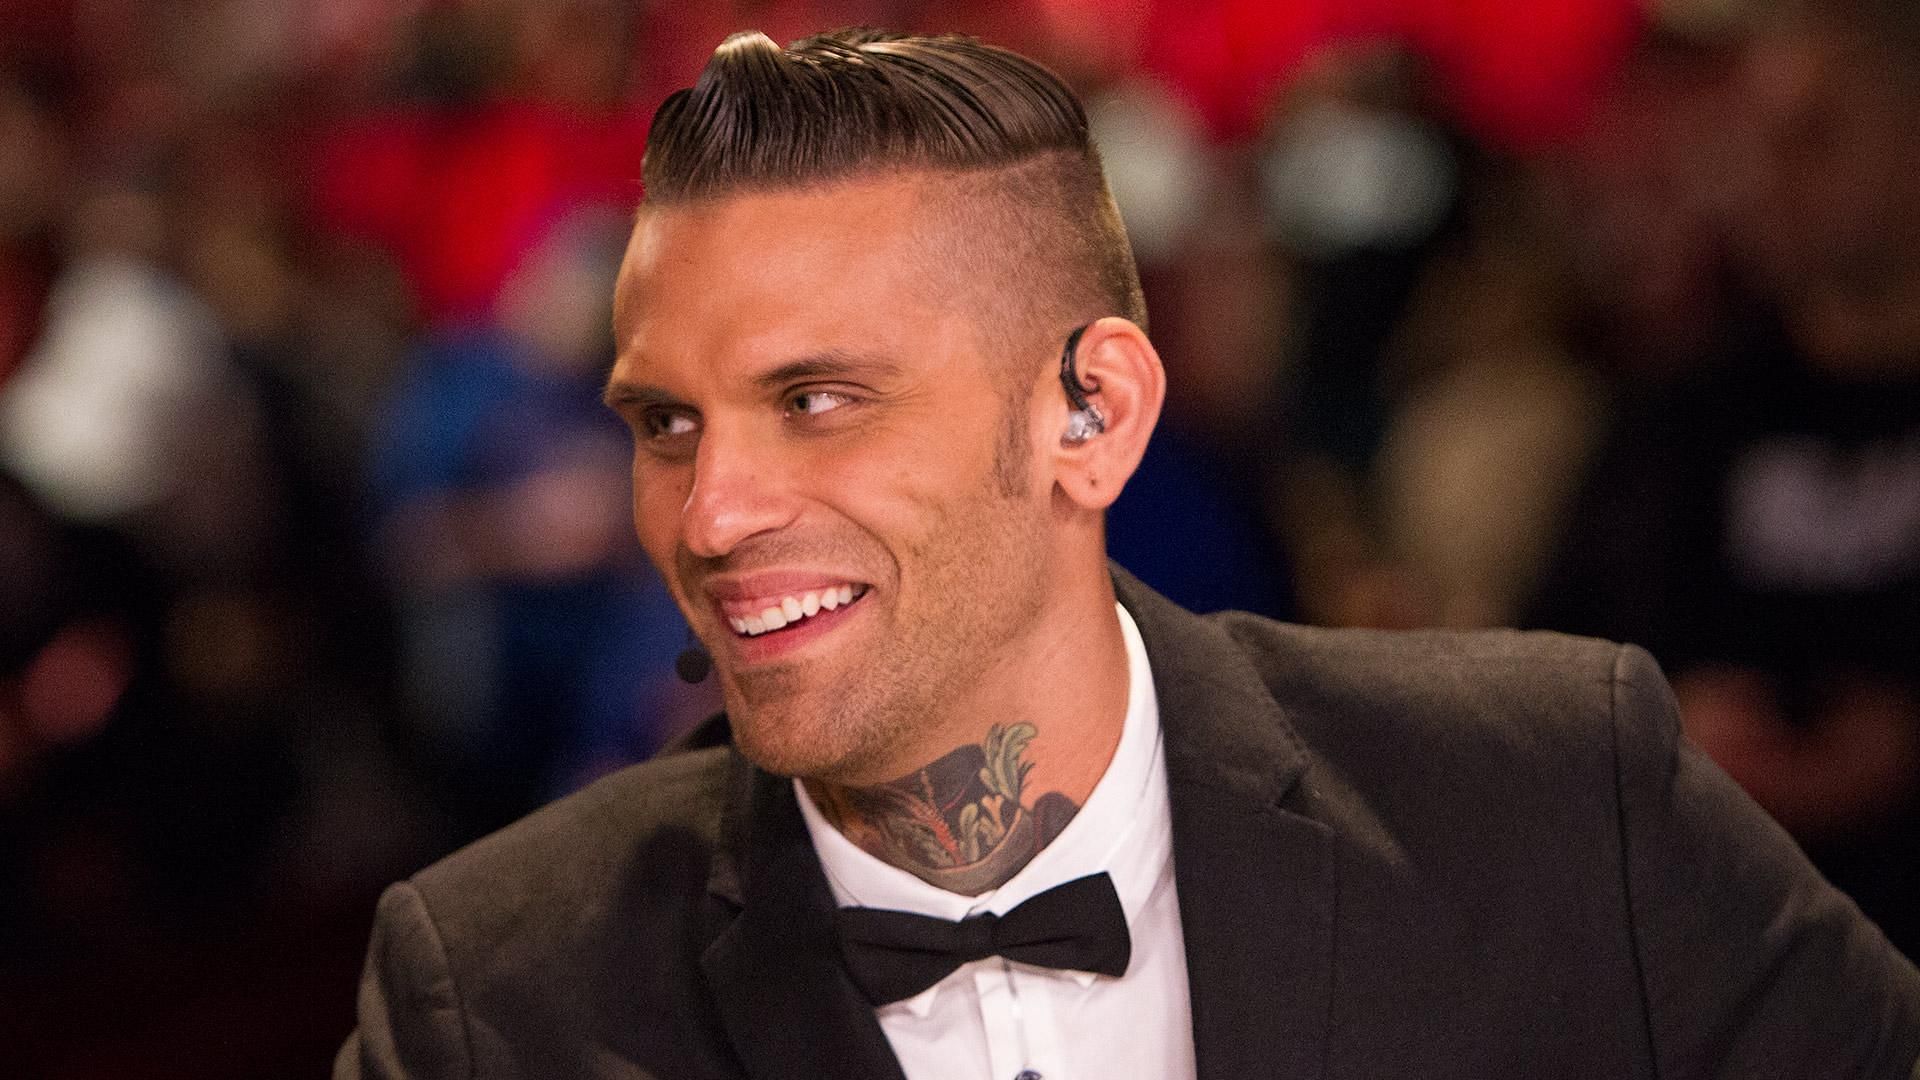 Corey Graves is a member of the Raw commentary team.